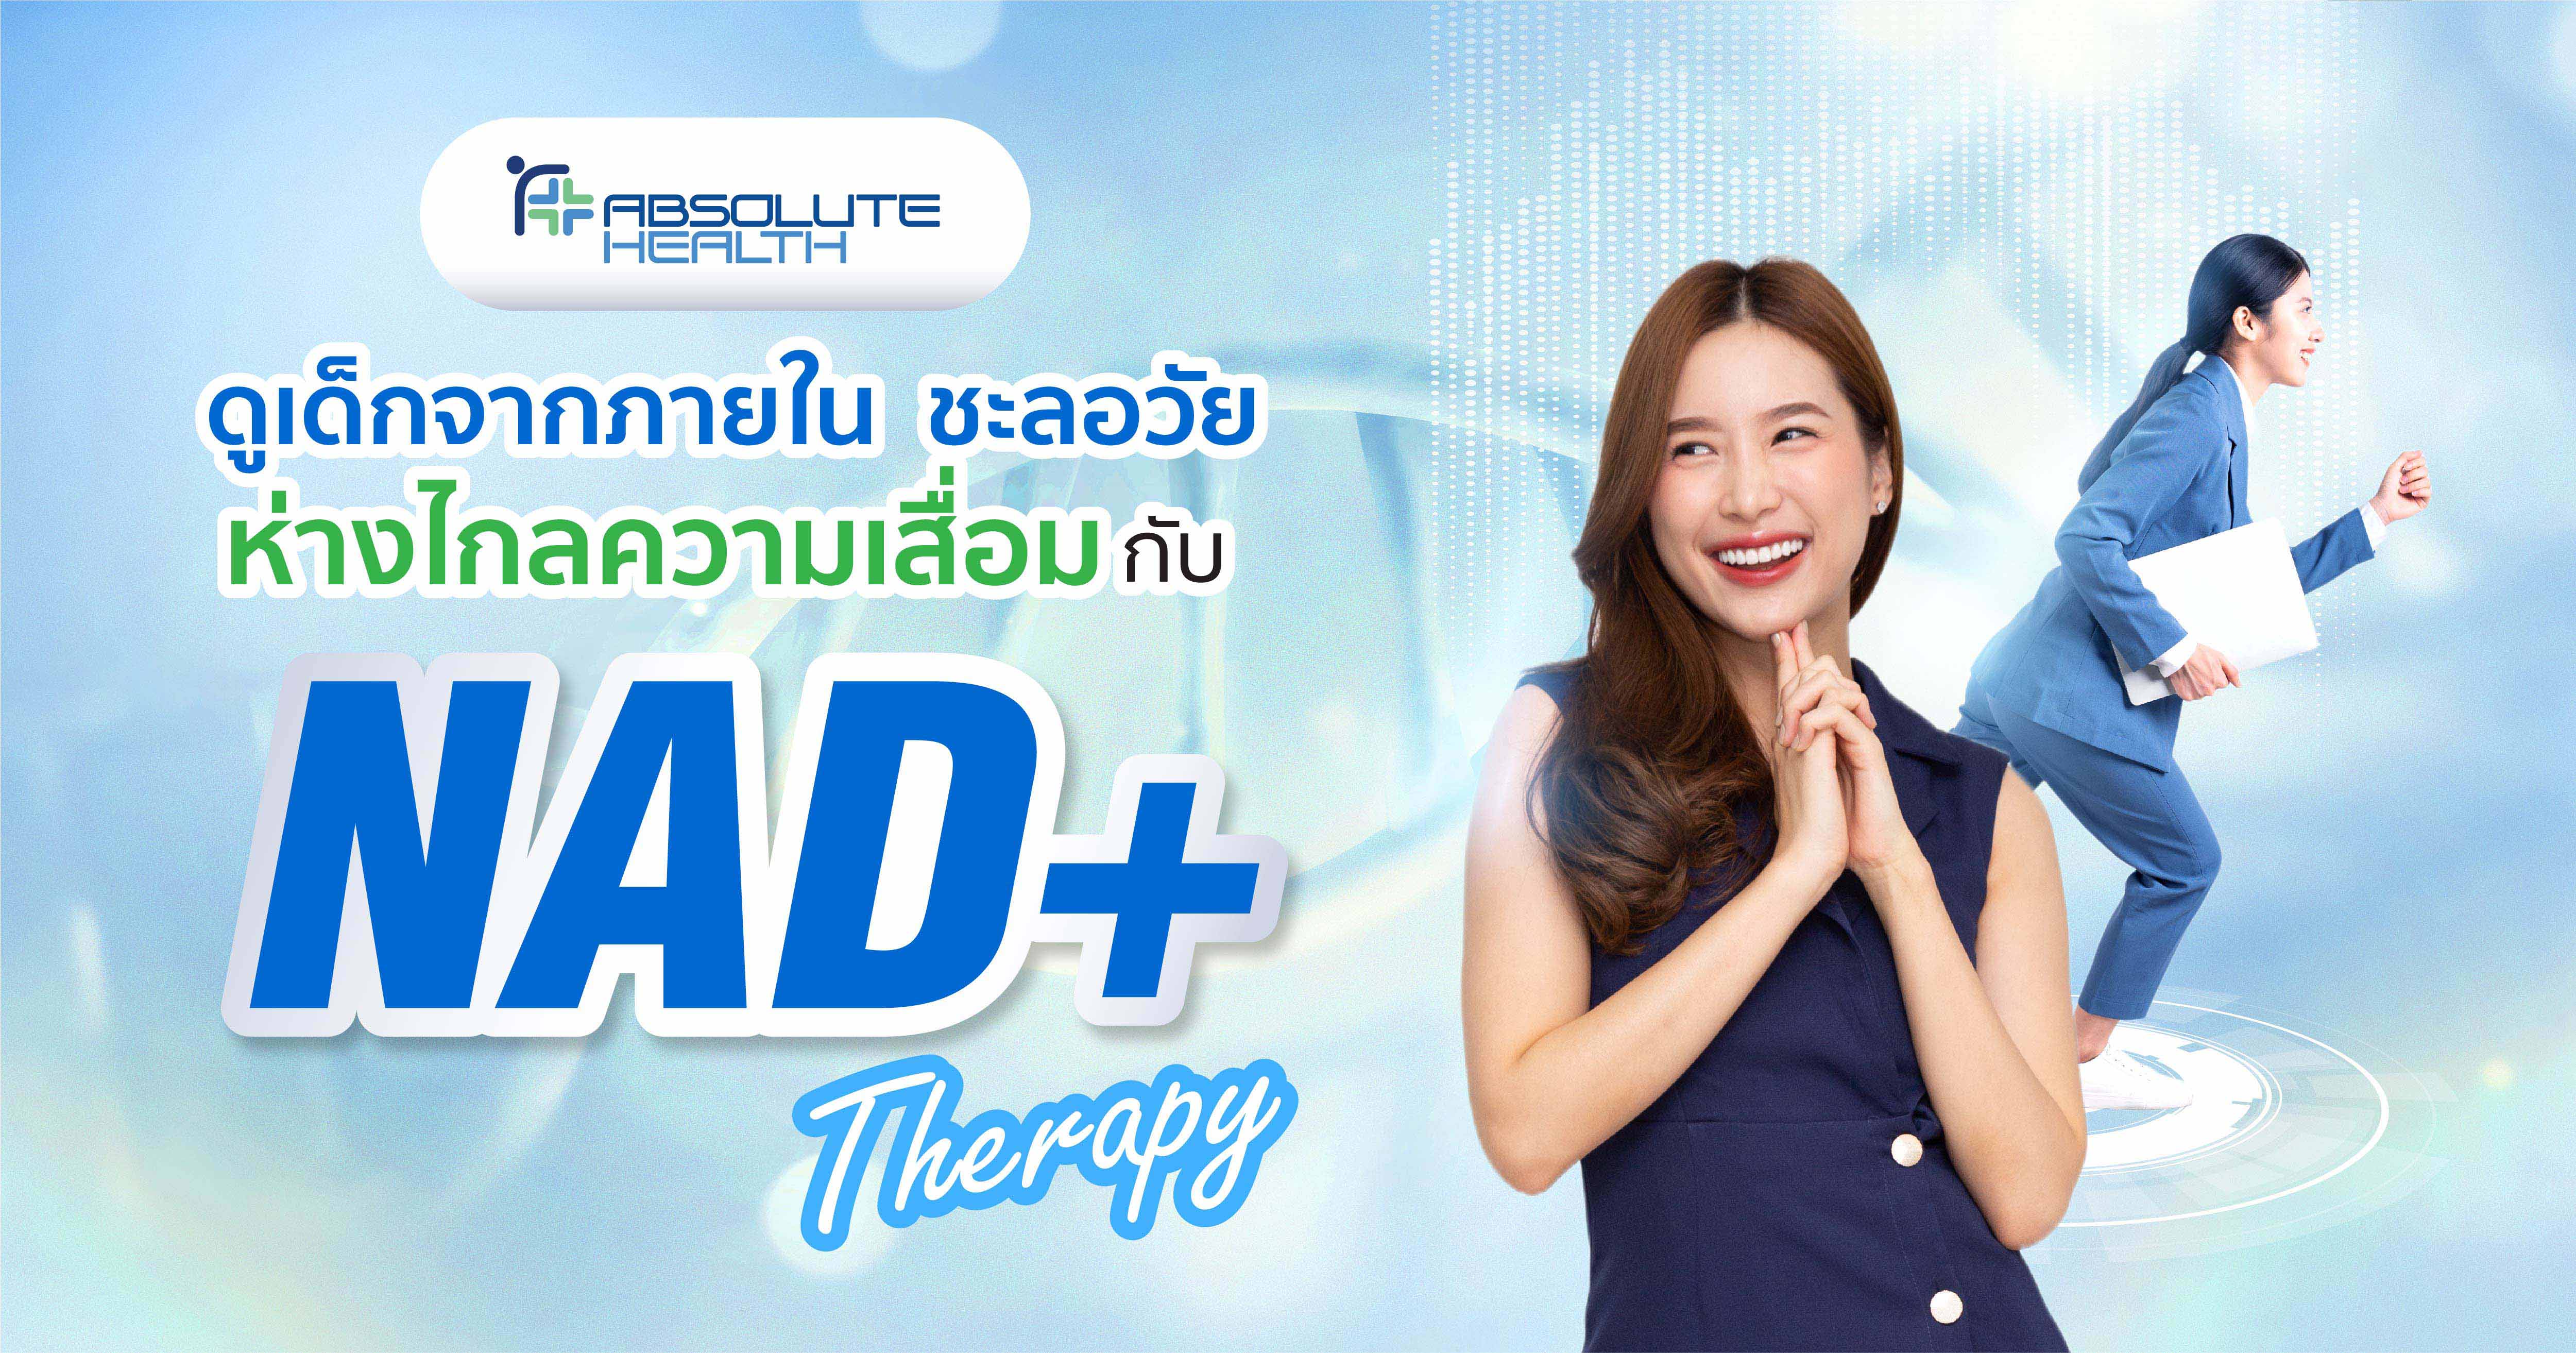 Looking for youth from within and slowing down aging and deterioration with NAD+ Therapy